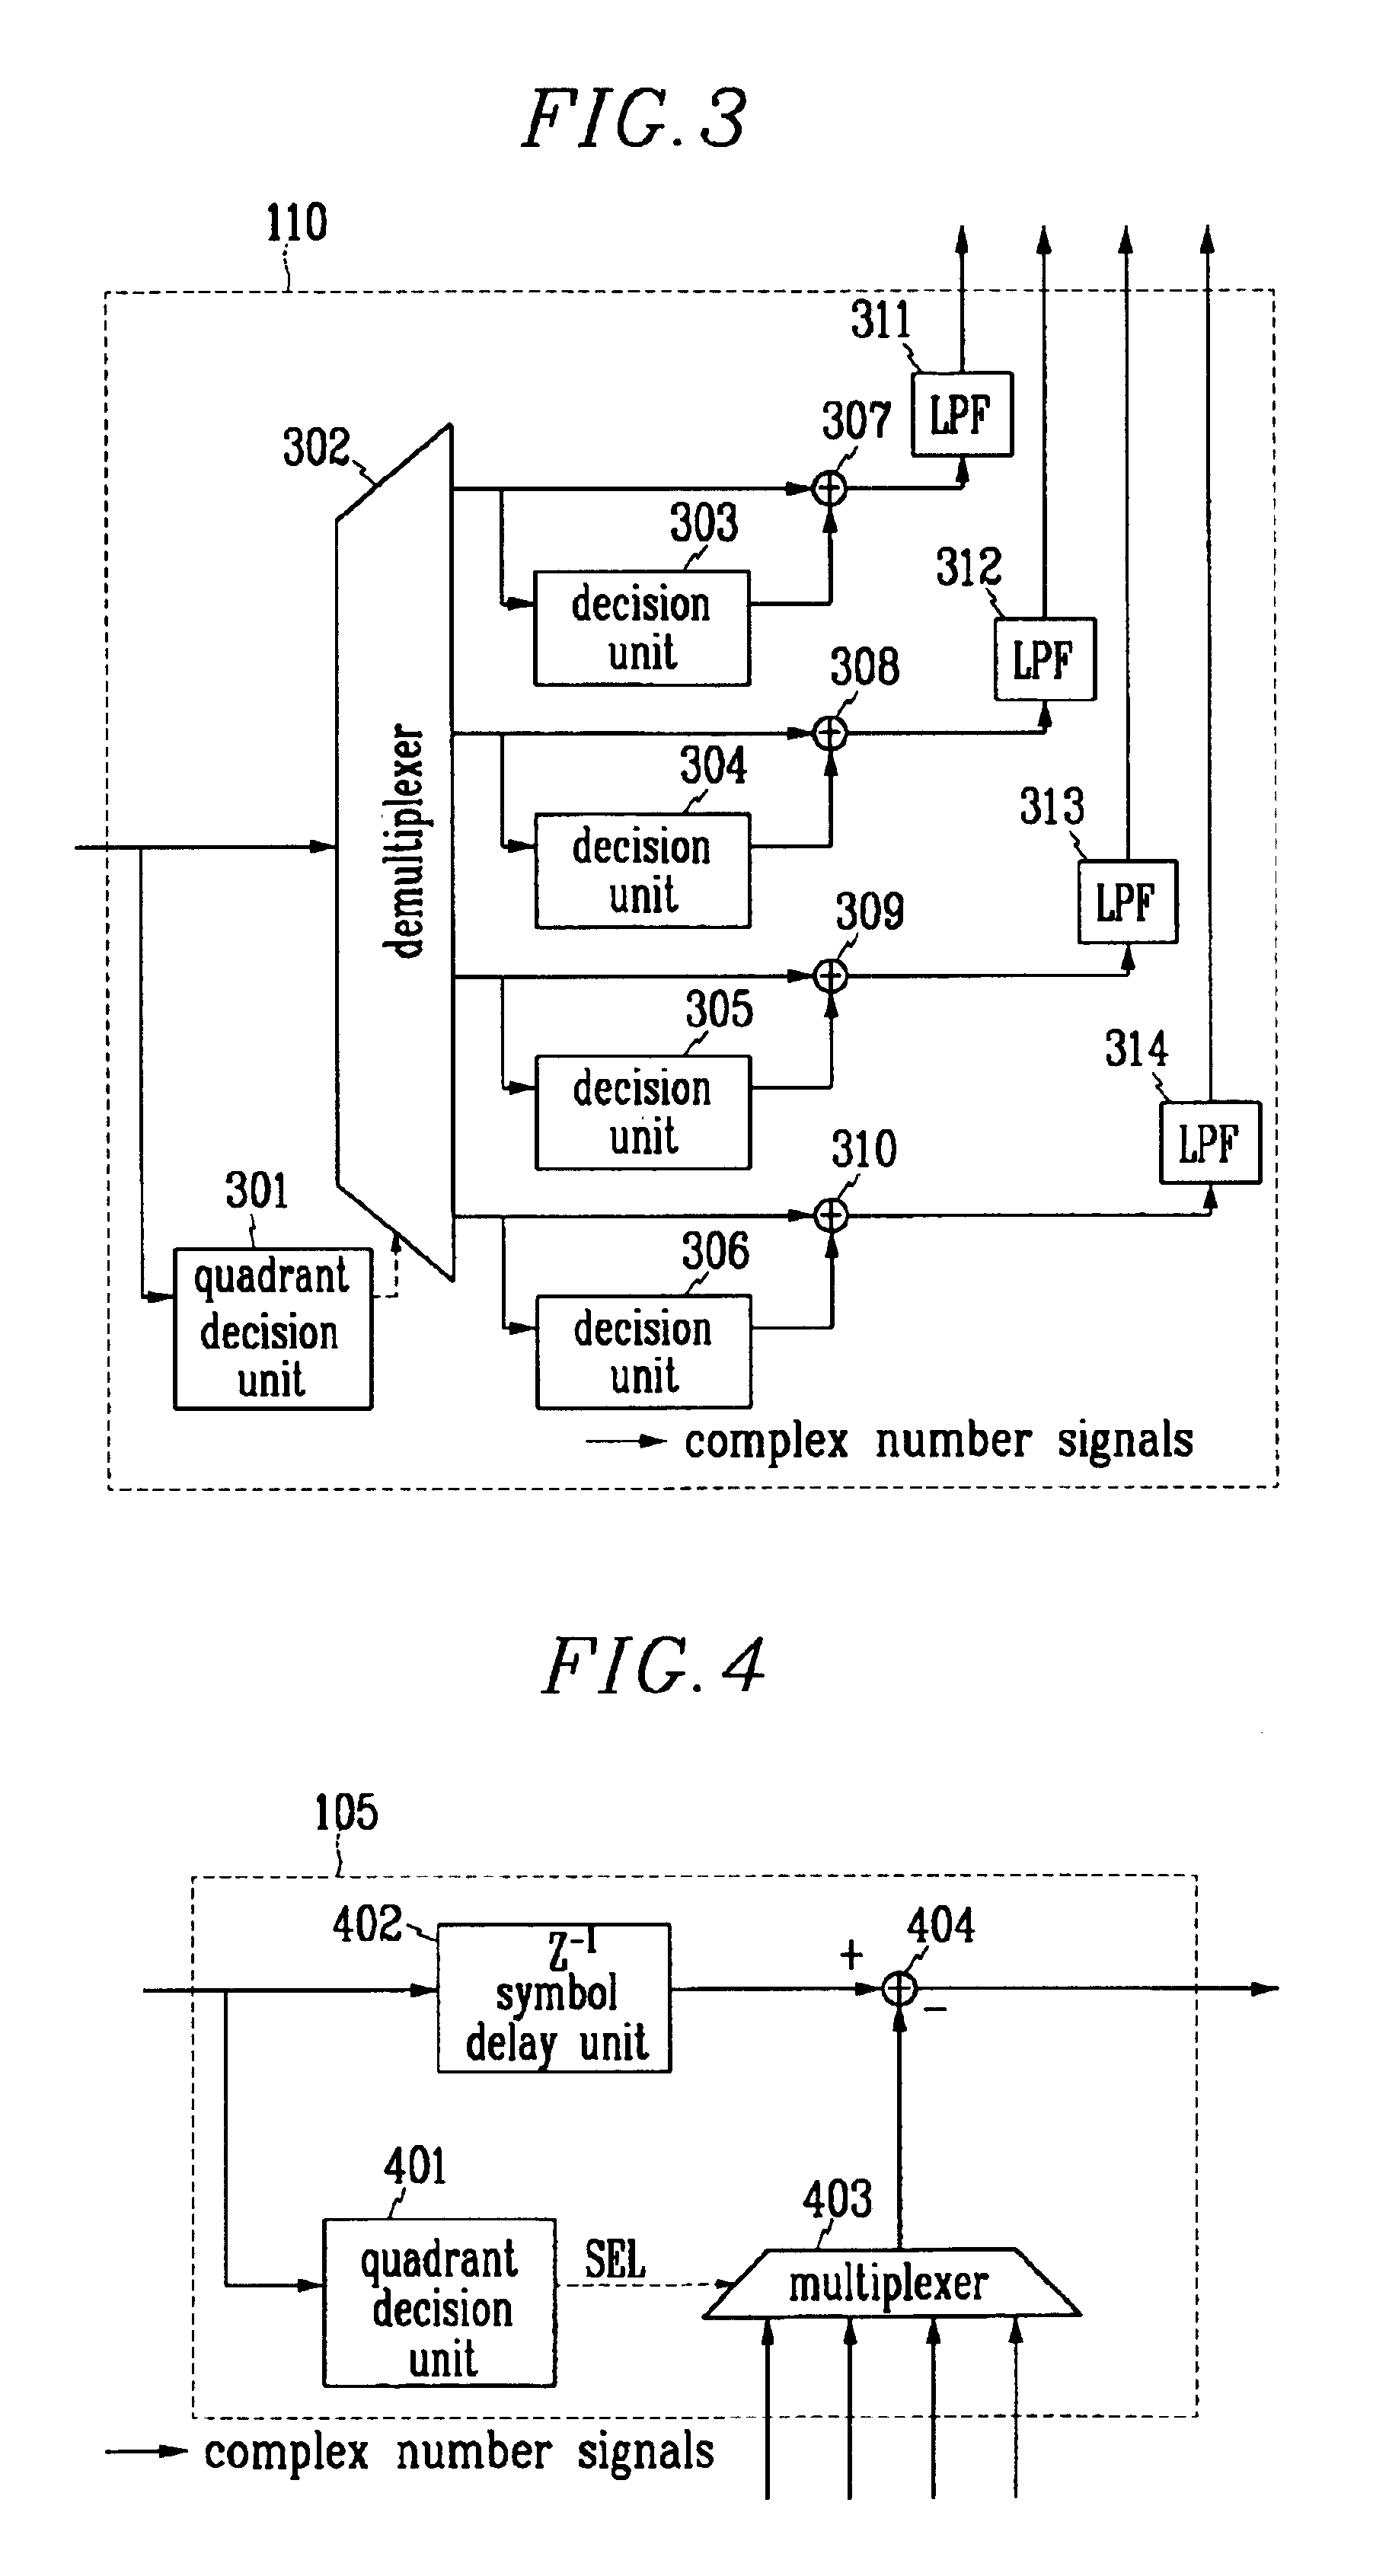 Method for detecting and correcting amplitude and phase imbalances between I and Q components in quadrature demodulator